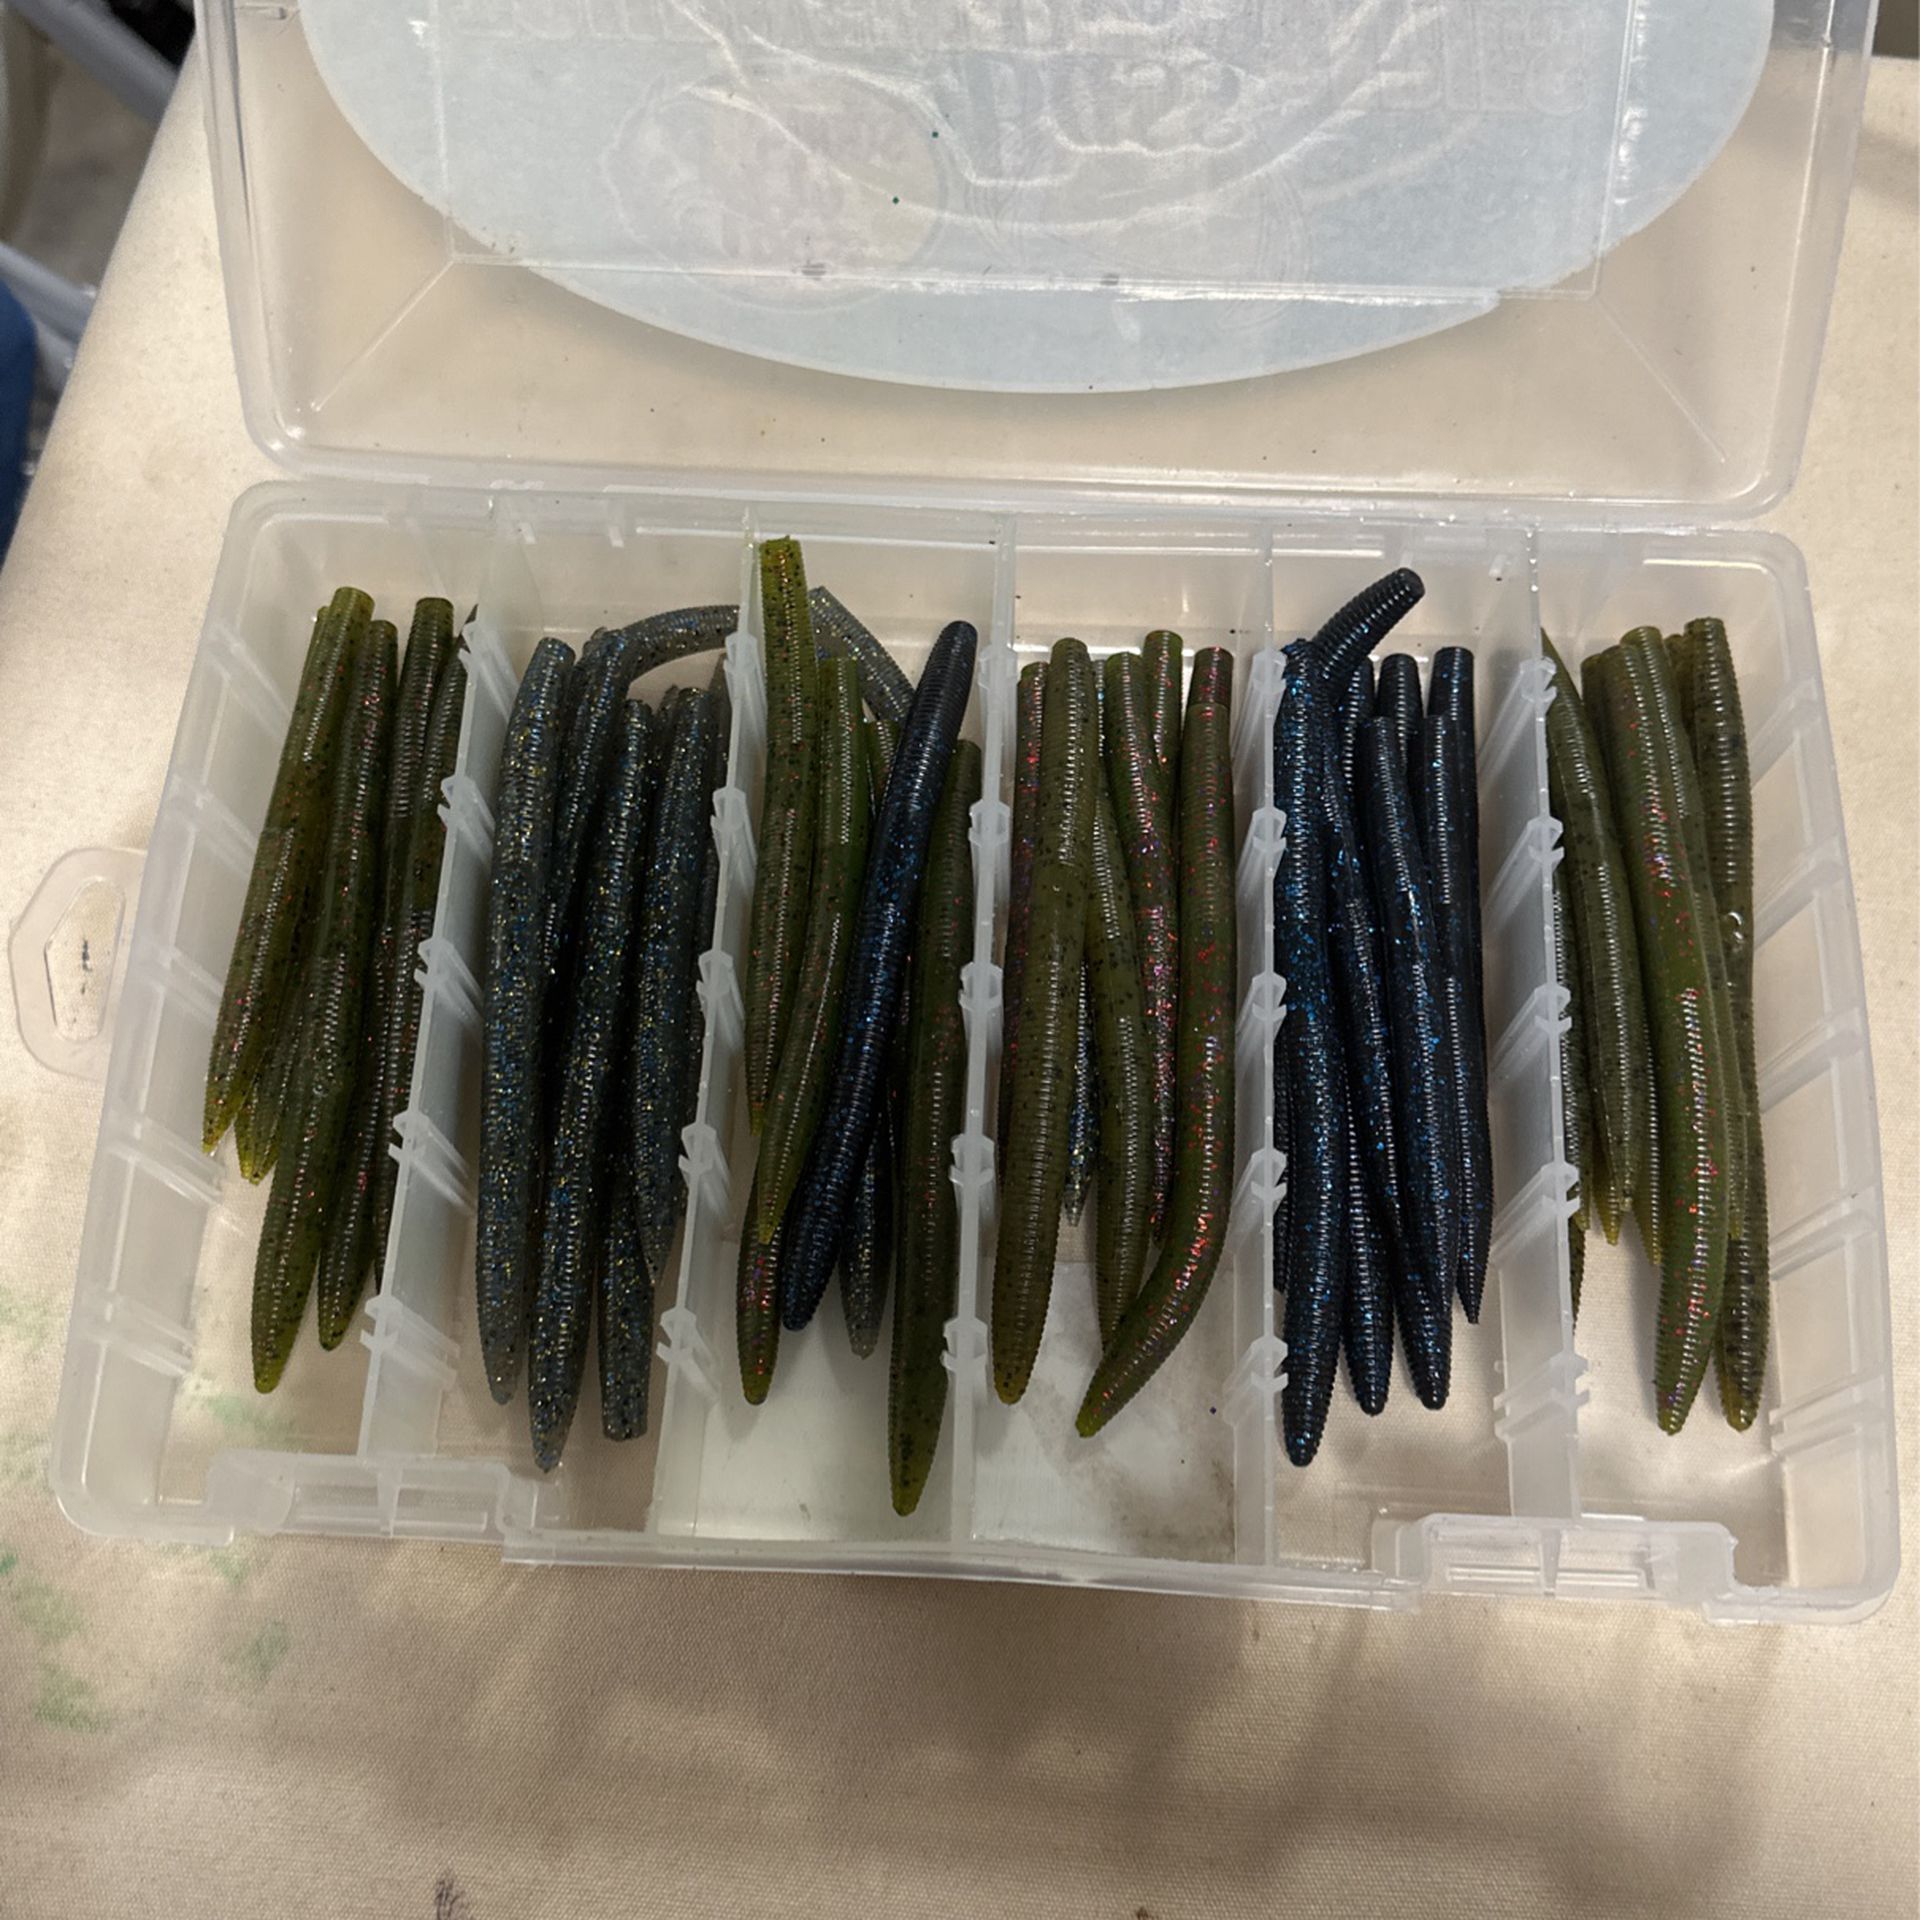 Worms for bass fishing